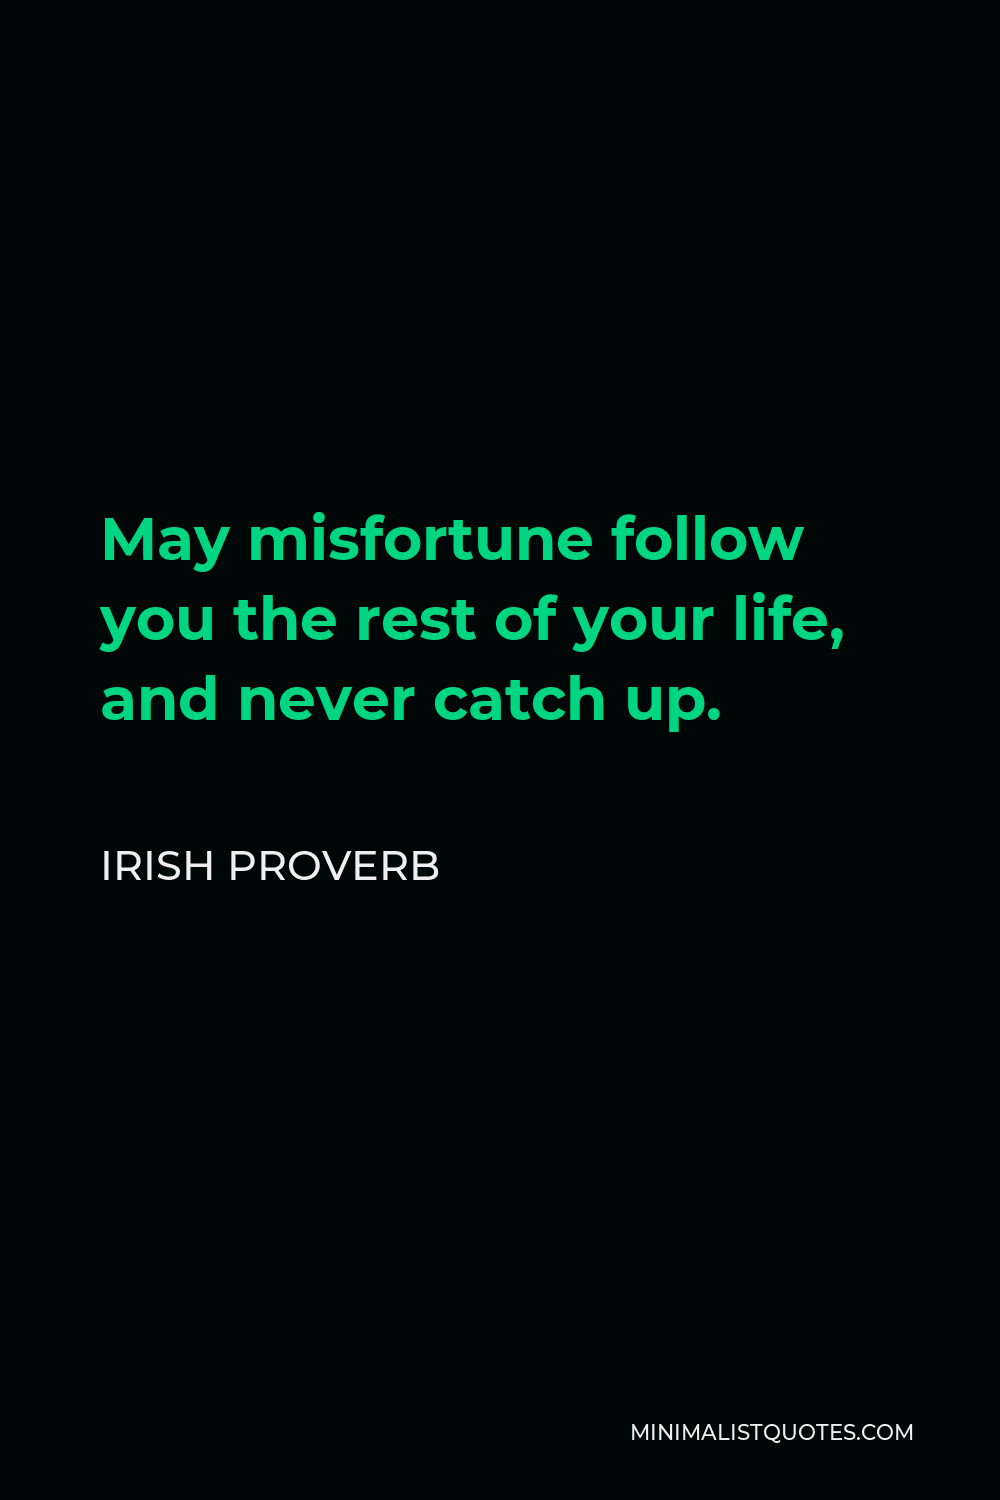 Irish Proverb Quote - May misfortune follow you the rest of your life, and never catch up.